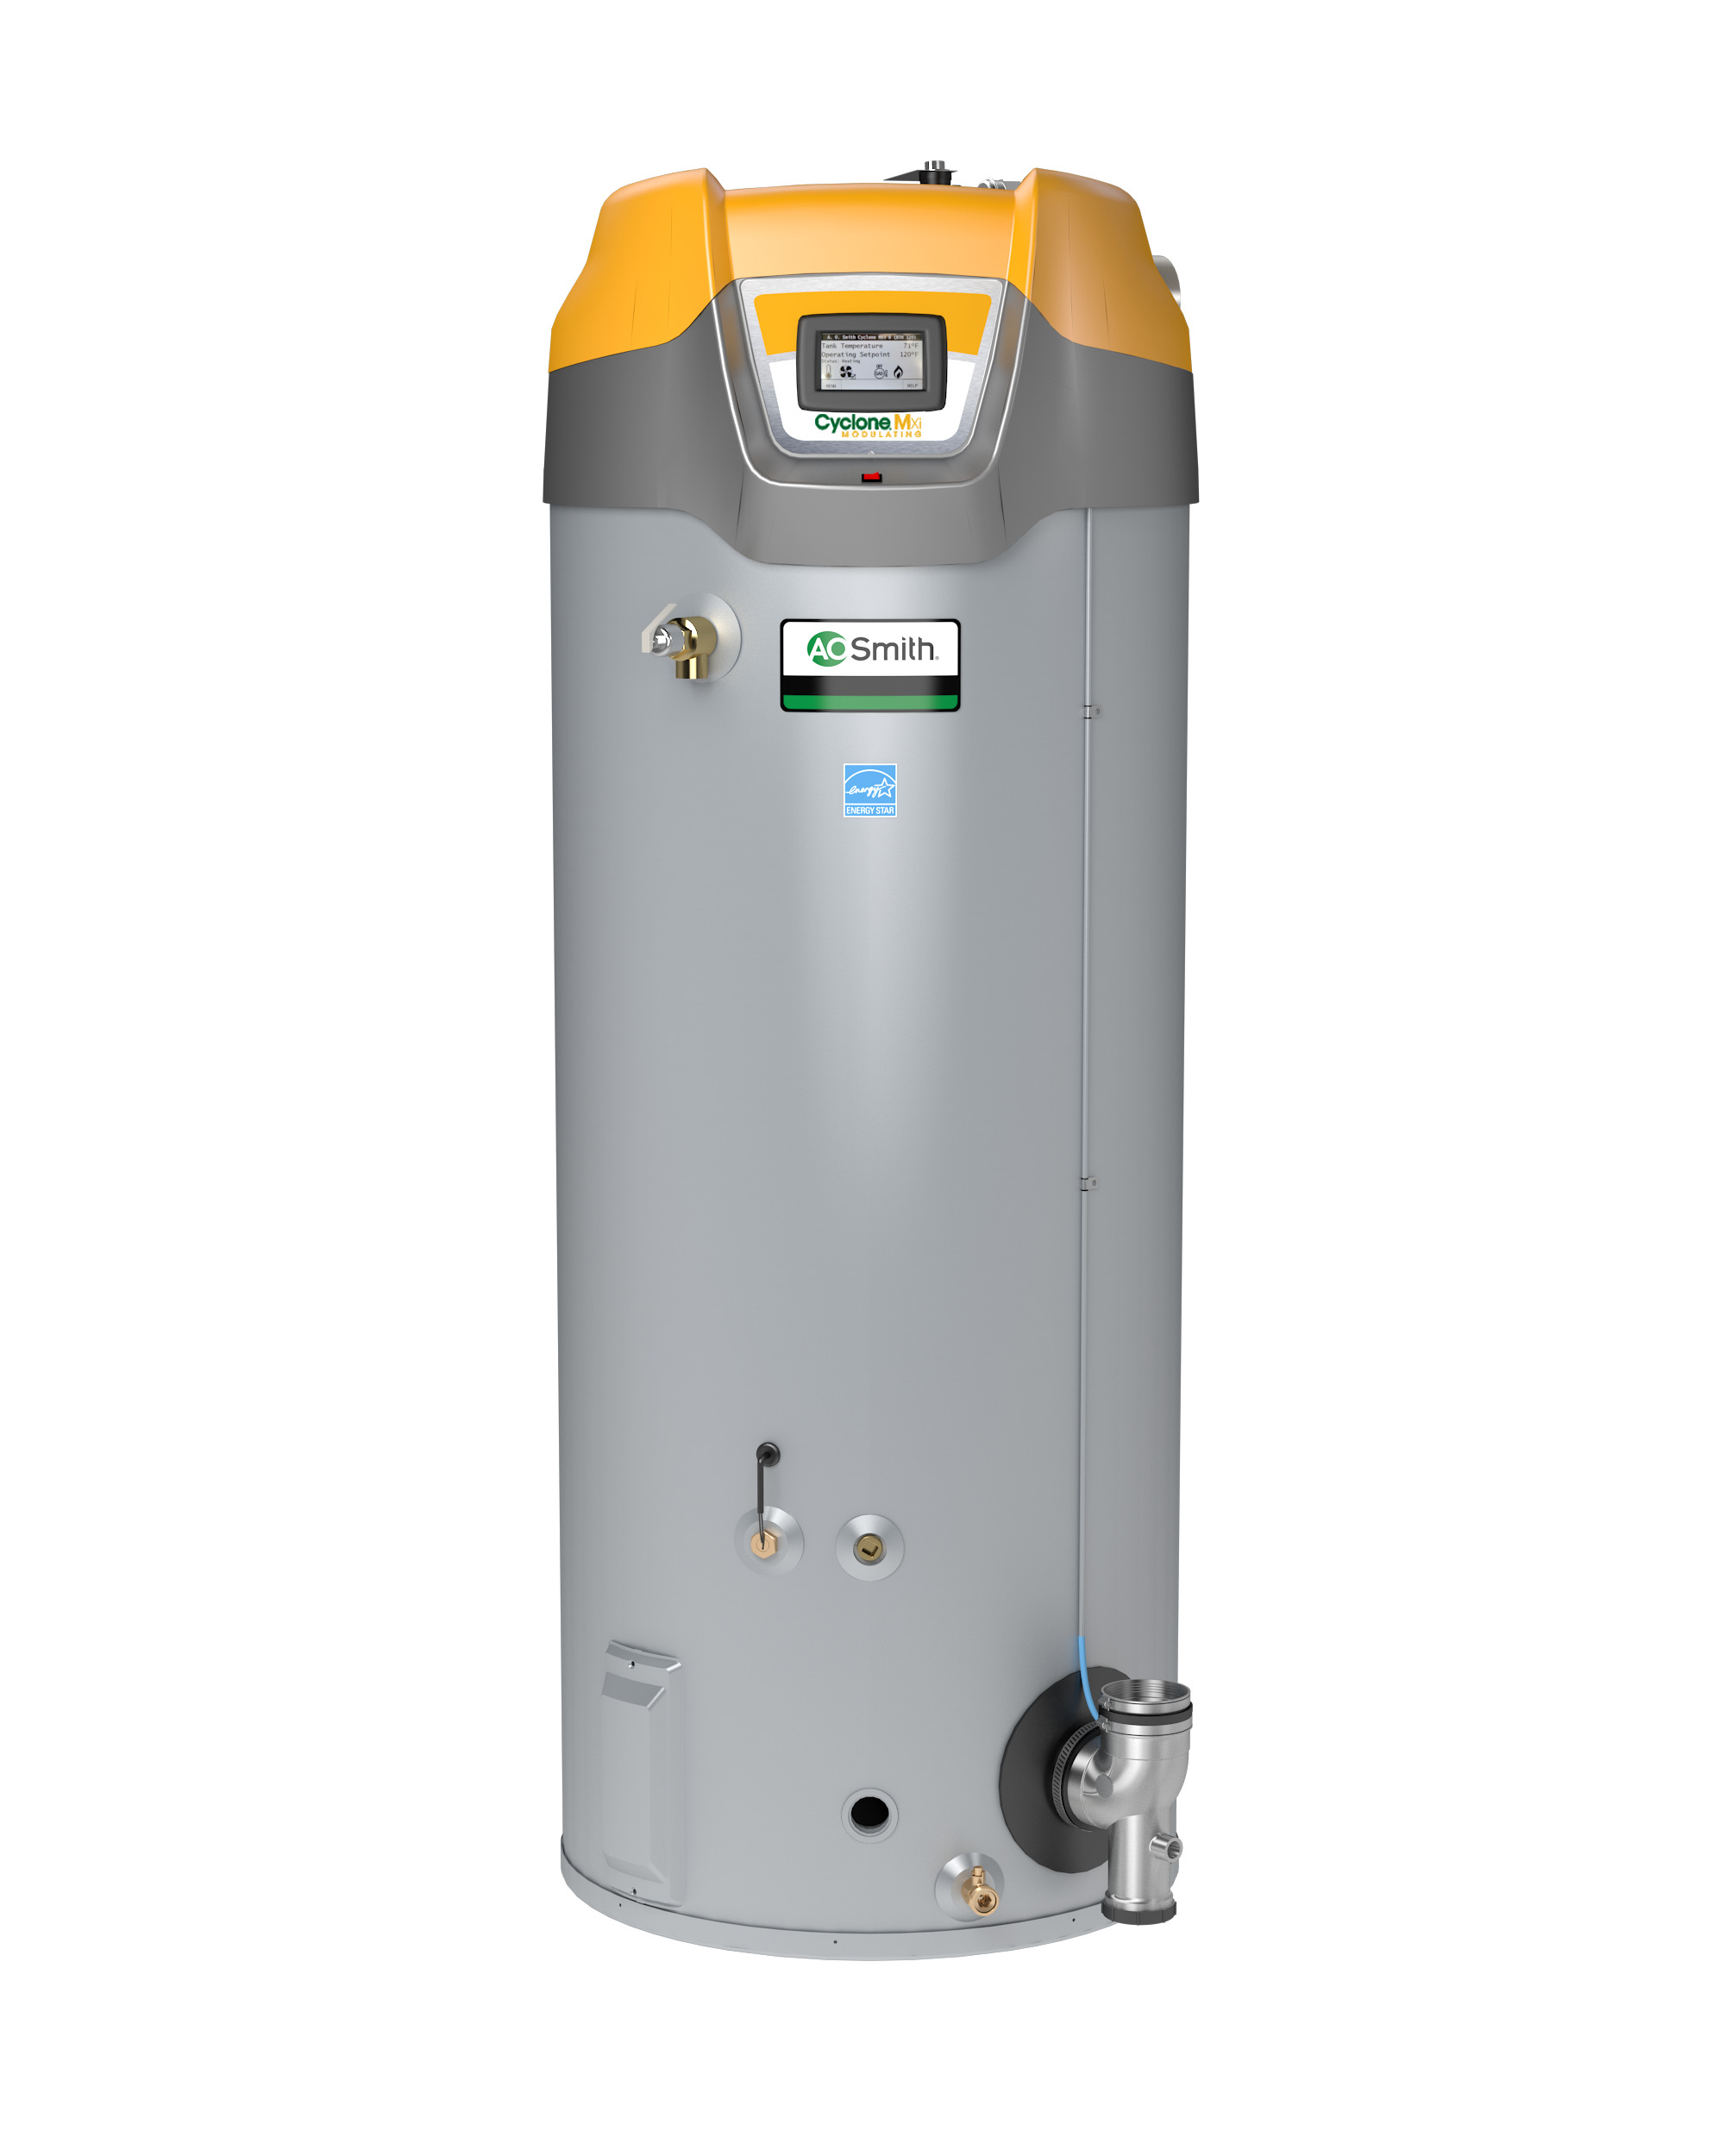 AO SMITH BTH-400A-LP: 119 GALLON, 399,900-BTU, UP TO 95% THERMAL EFFICIENCY, ASME, 4" VENT, LP (LIQUID PROPANE) CYCLONE Mxi MODULATING COMMERCIAL GAS WATER HEATER